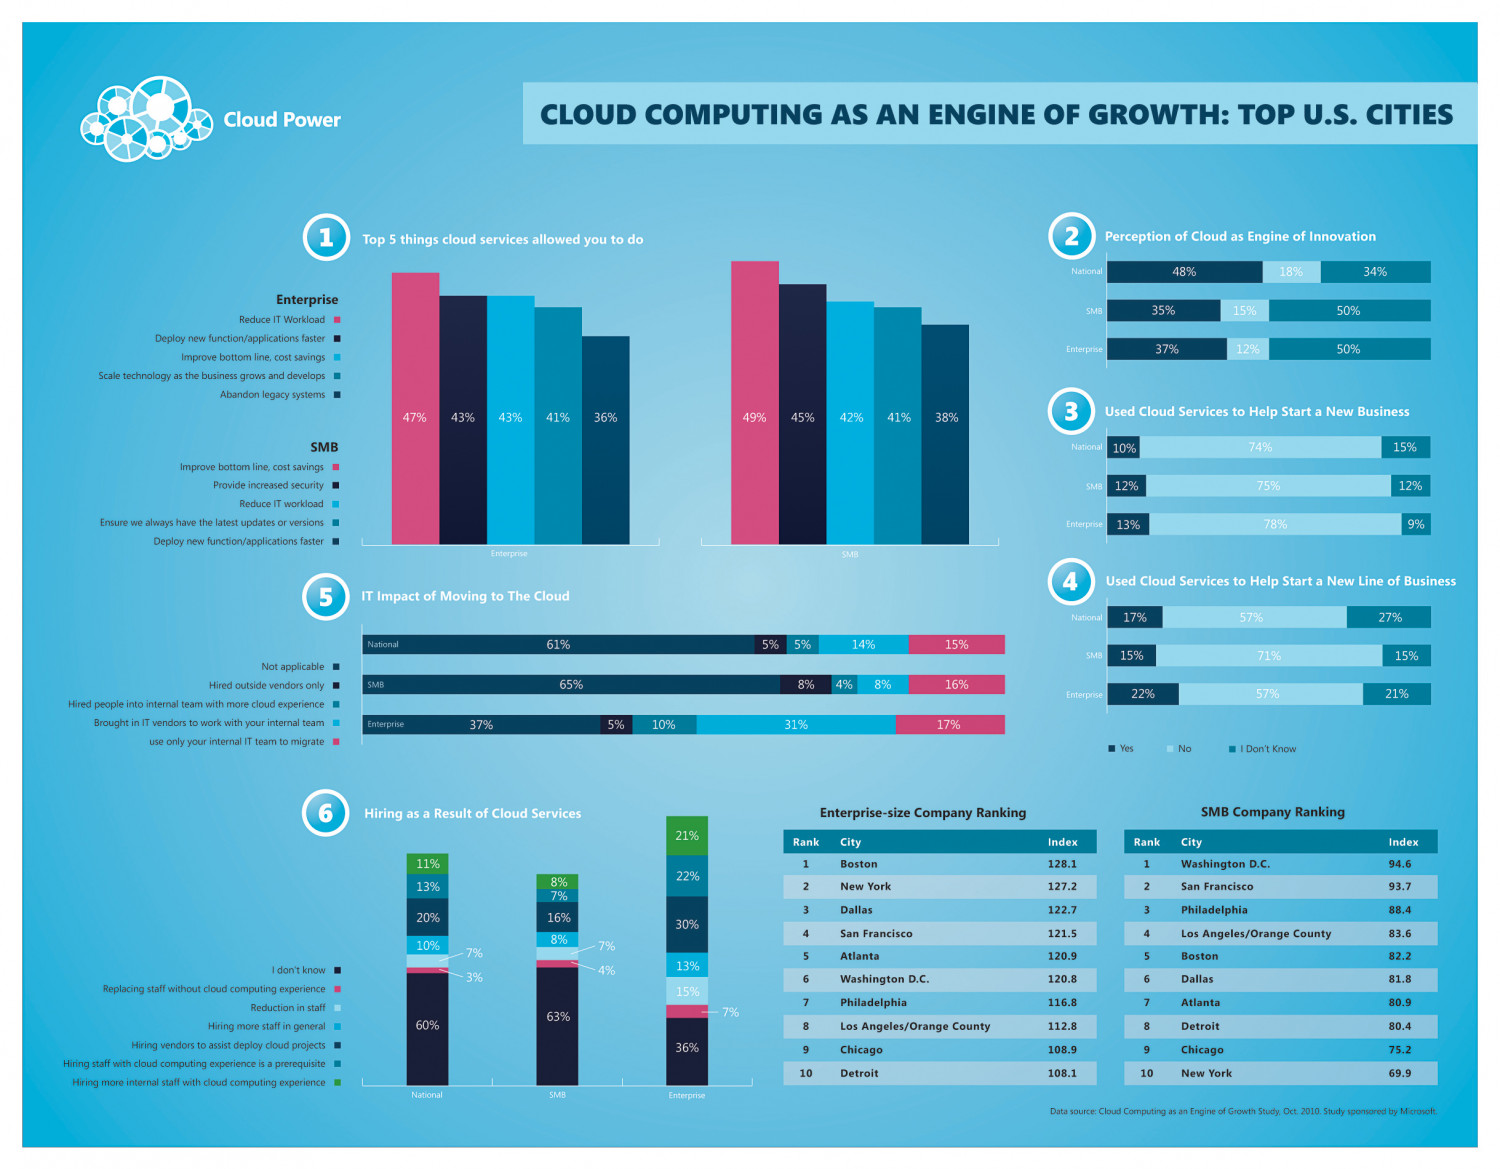 Cloud Computing as an Engine of Growth Infographic